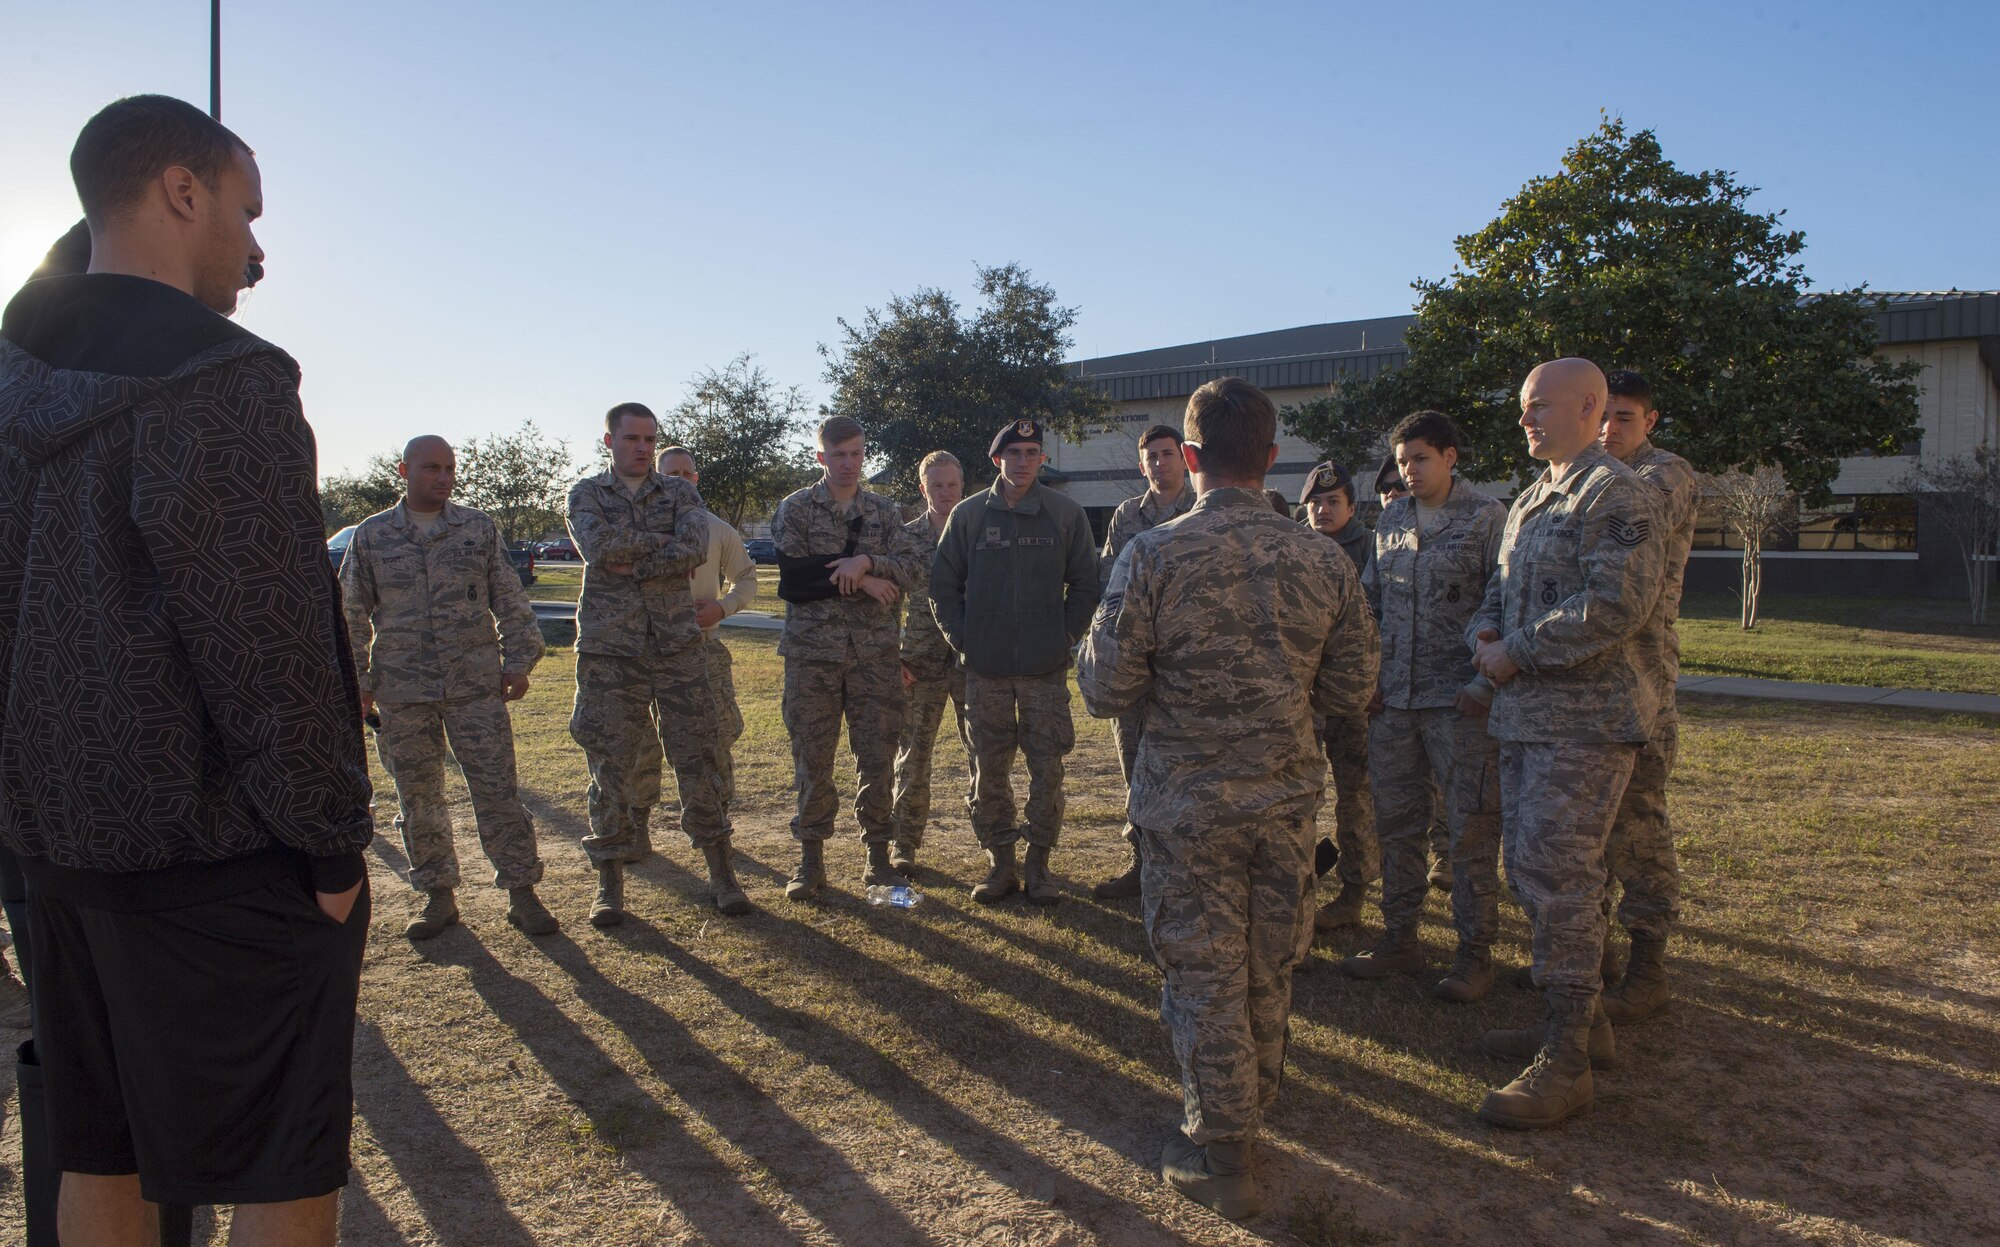 Airmen with the 1st Special Operations Security Forces Squadron are briefed on taser safety before engaging taser training at Hurlburt Field, Fla., Feb. 10, 2016. If a suspect isn’t complying with verbal orders, the use of a taser on a suspect can be a secondary use of force. (U.S. Air Force photo by Senior Airman Krystal M. Garrett)